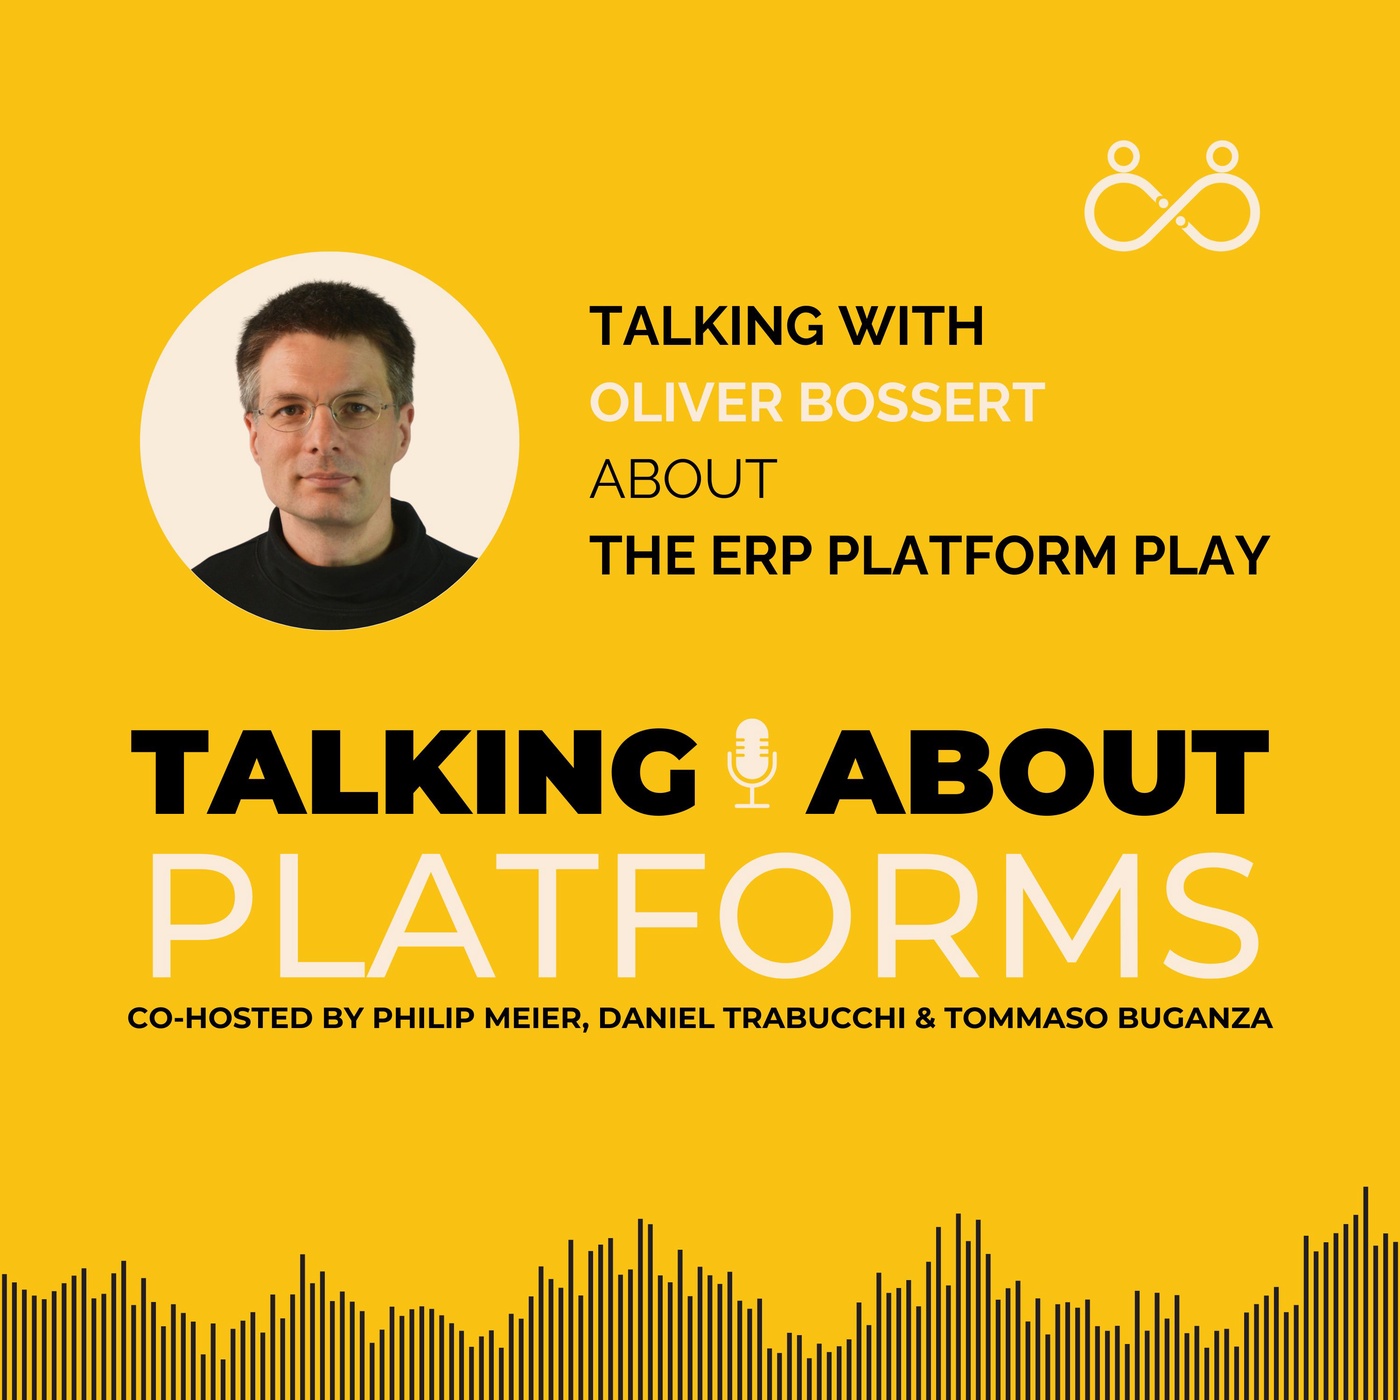 The ERP platform play with Oliver Bossert